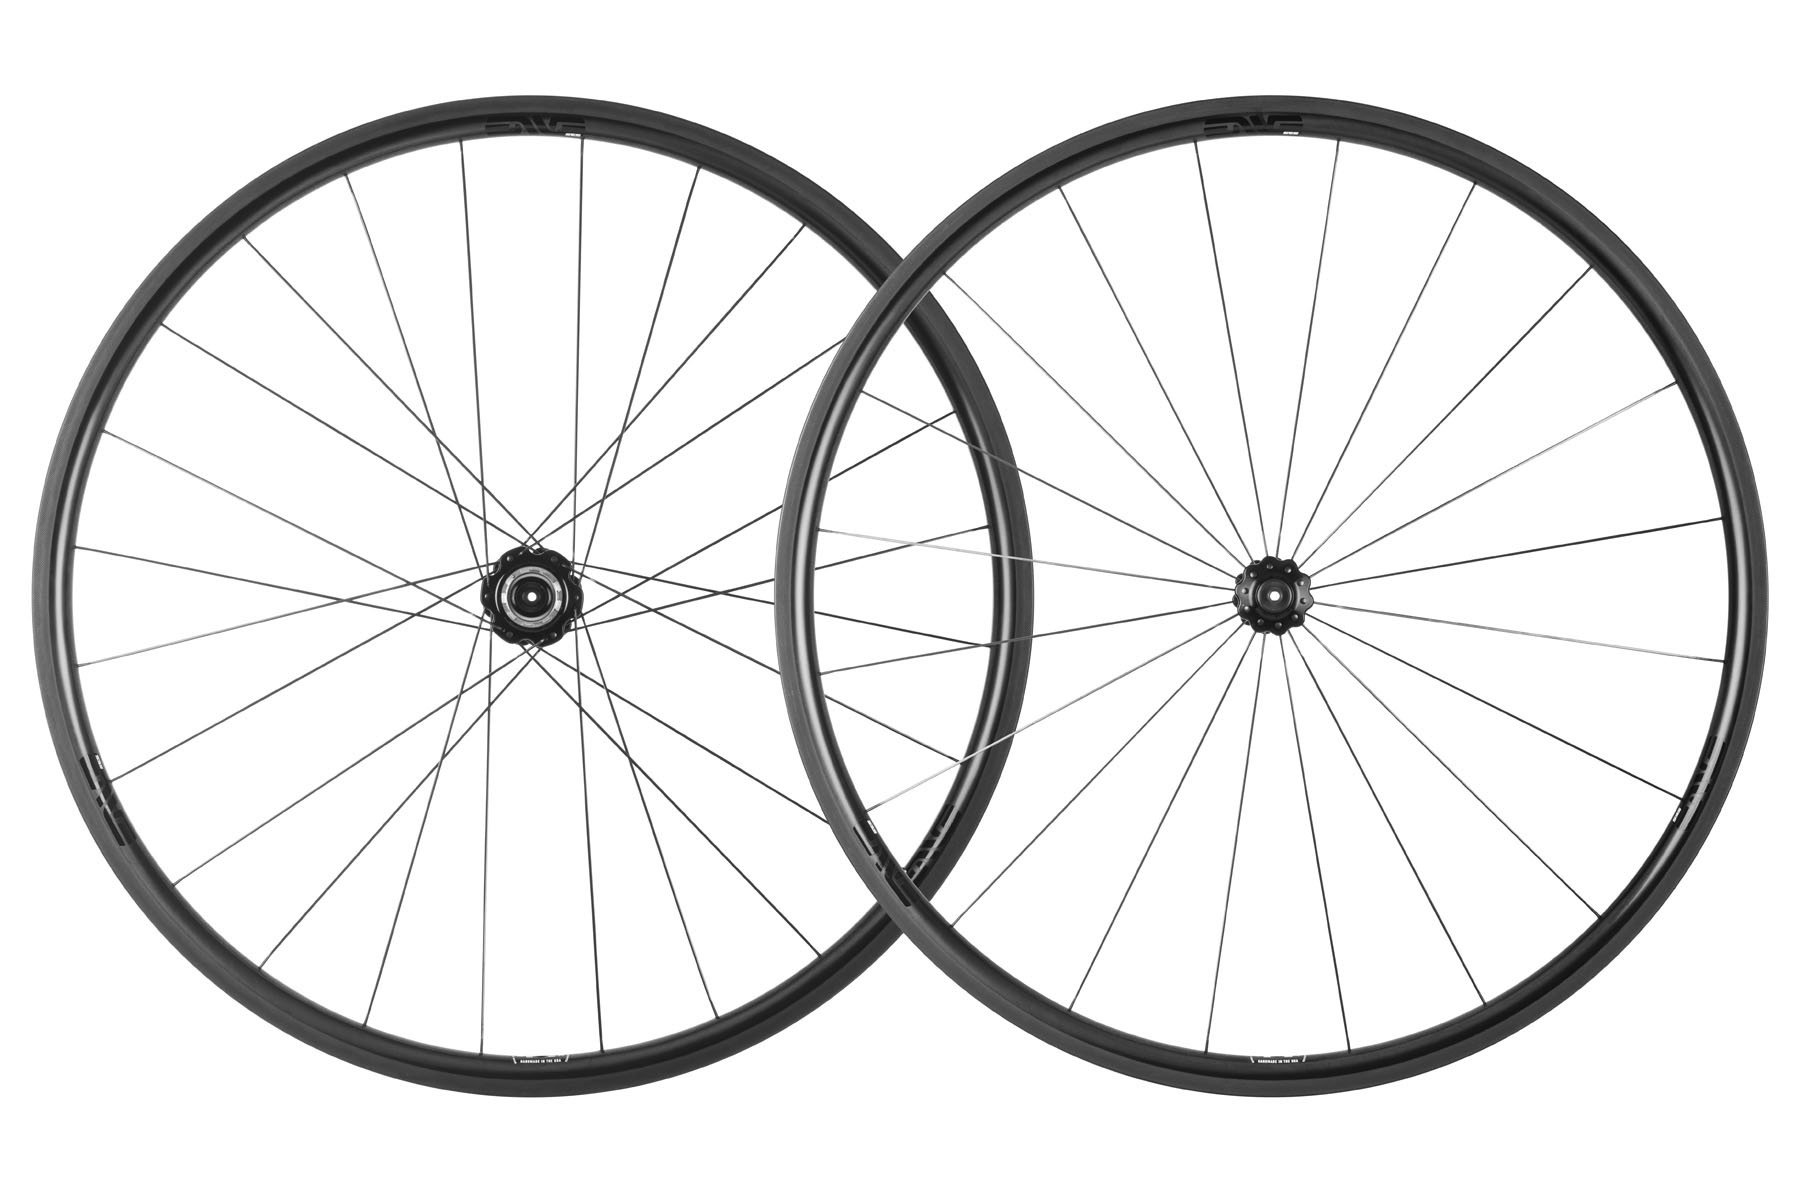 Spinergy GX Wheels: At The Finish - Riding Gravel